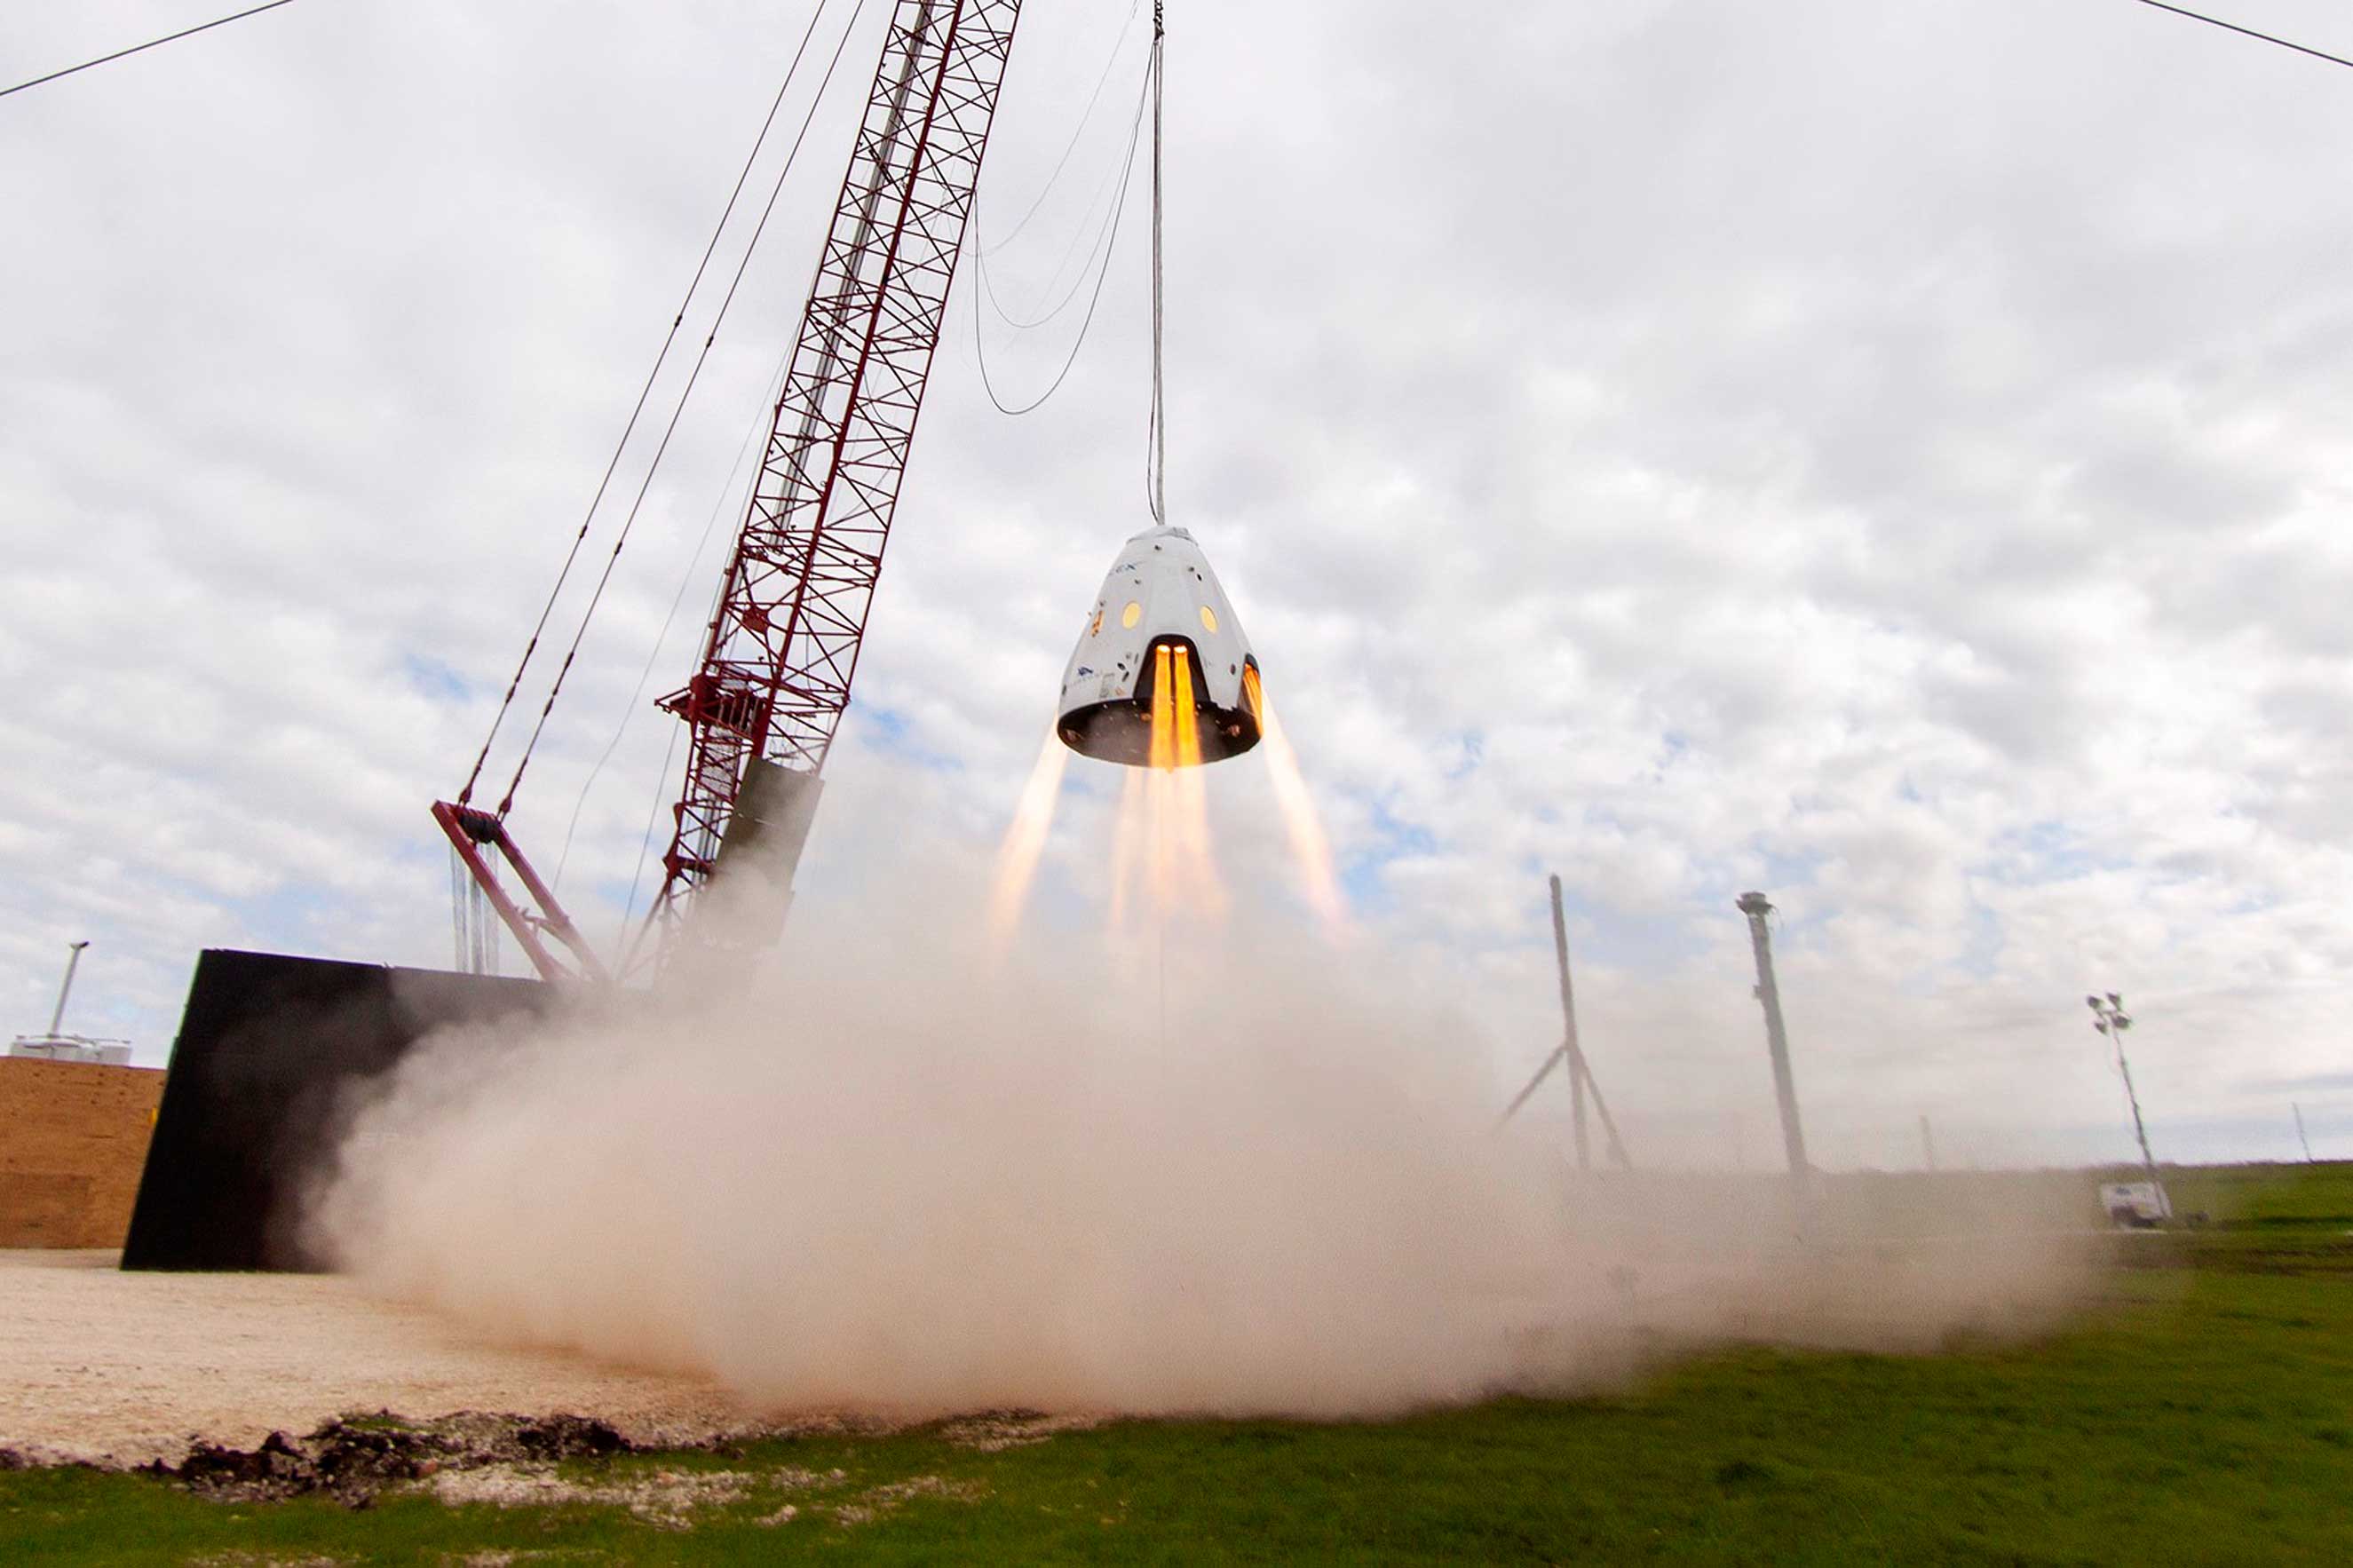 A test of the Dragon spacecraft’s landing engines, which could be used in lieu of parachutes (SpaceX)